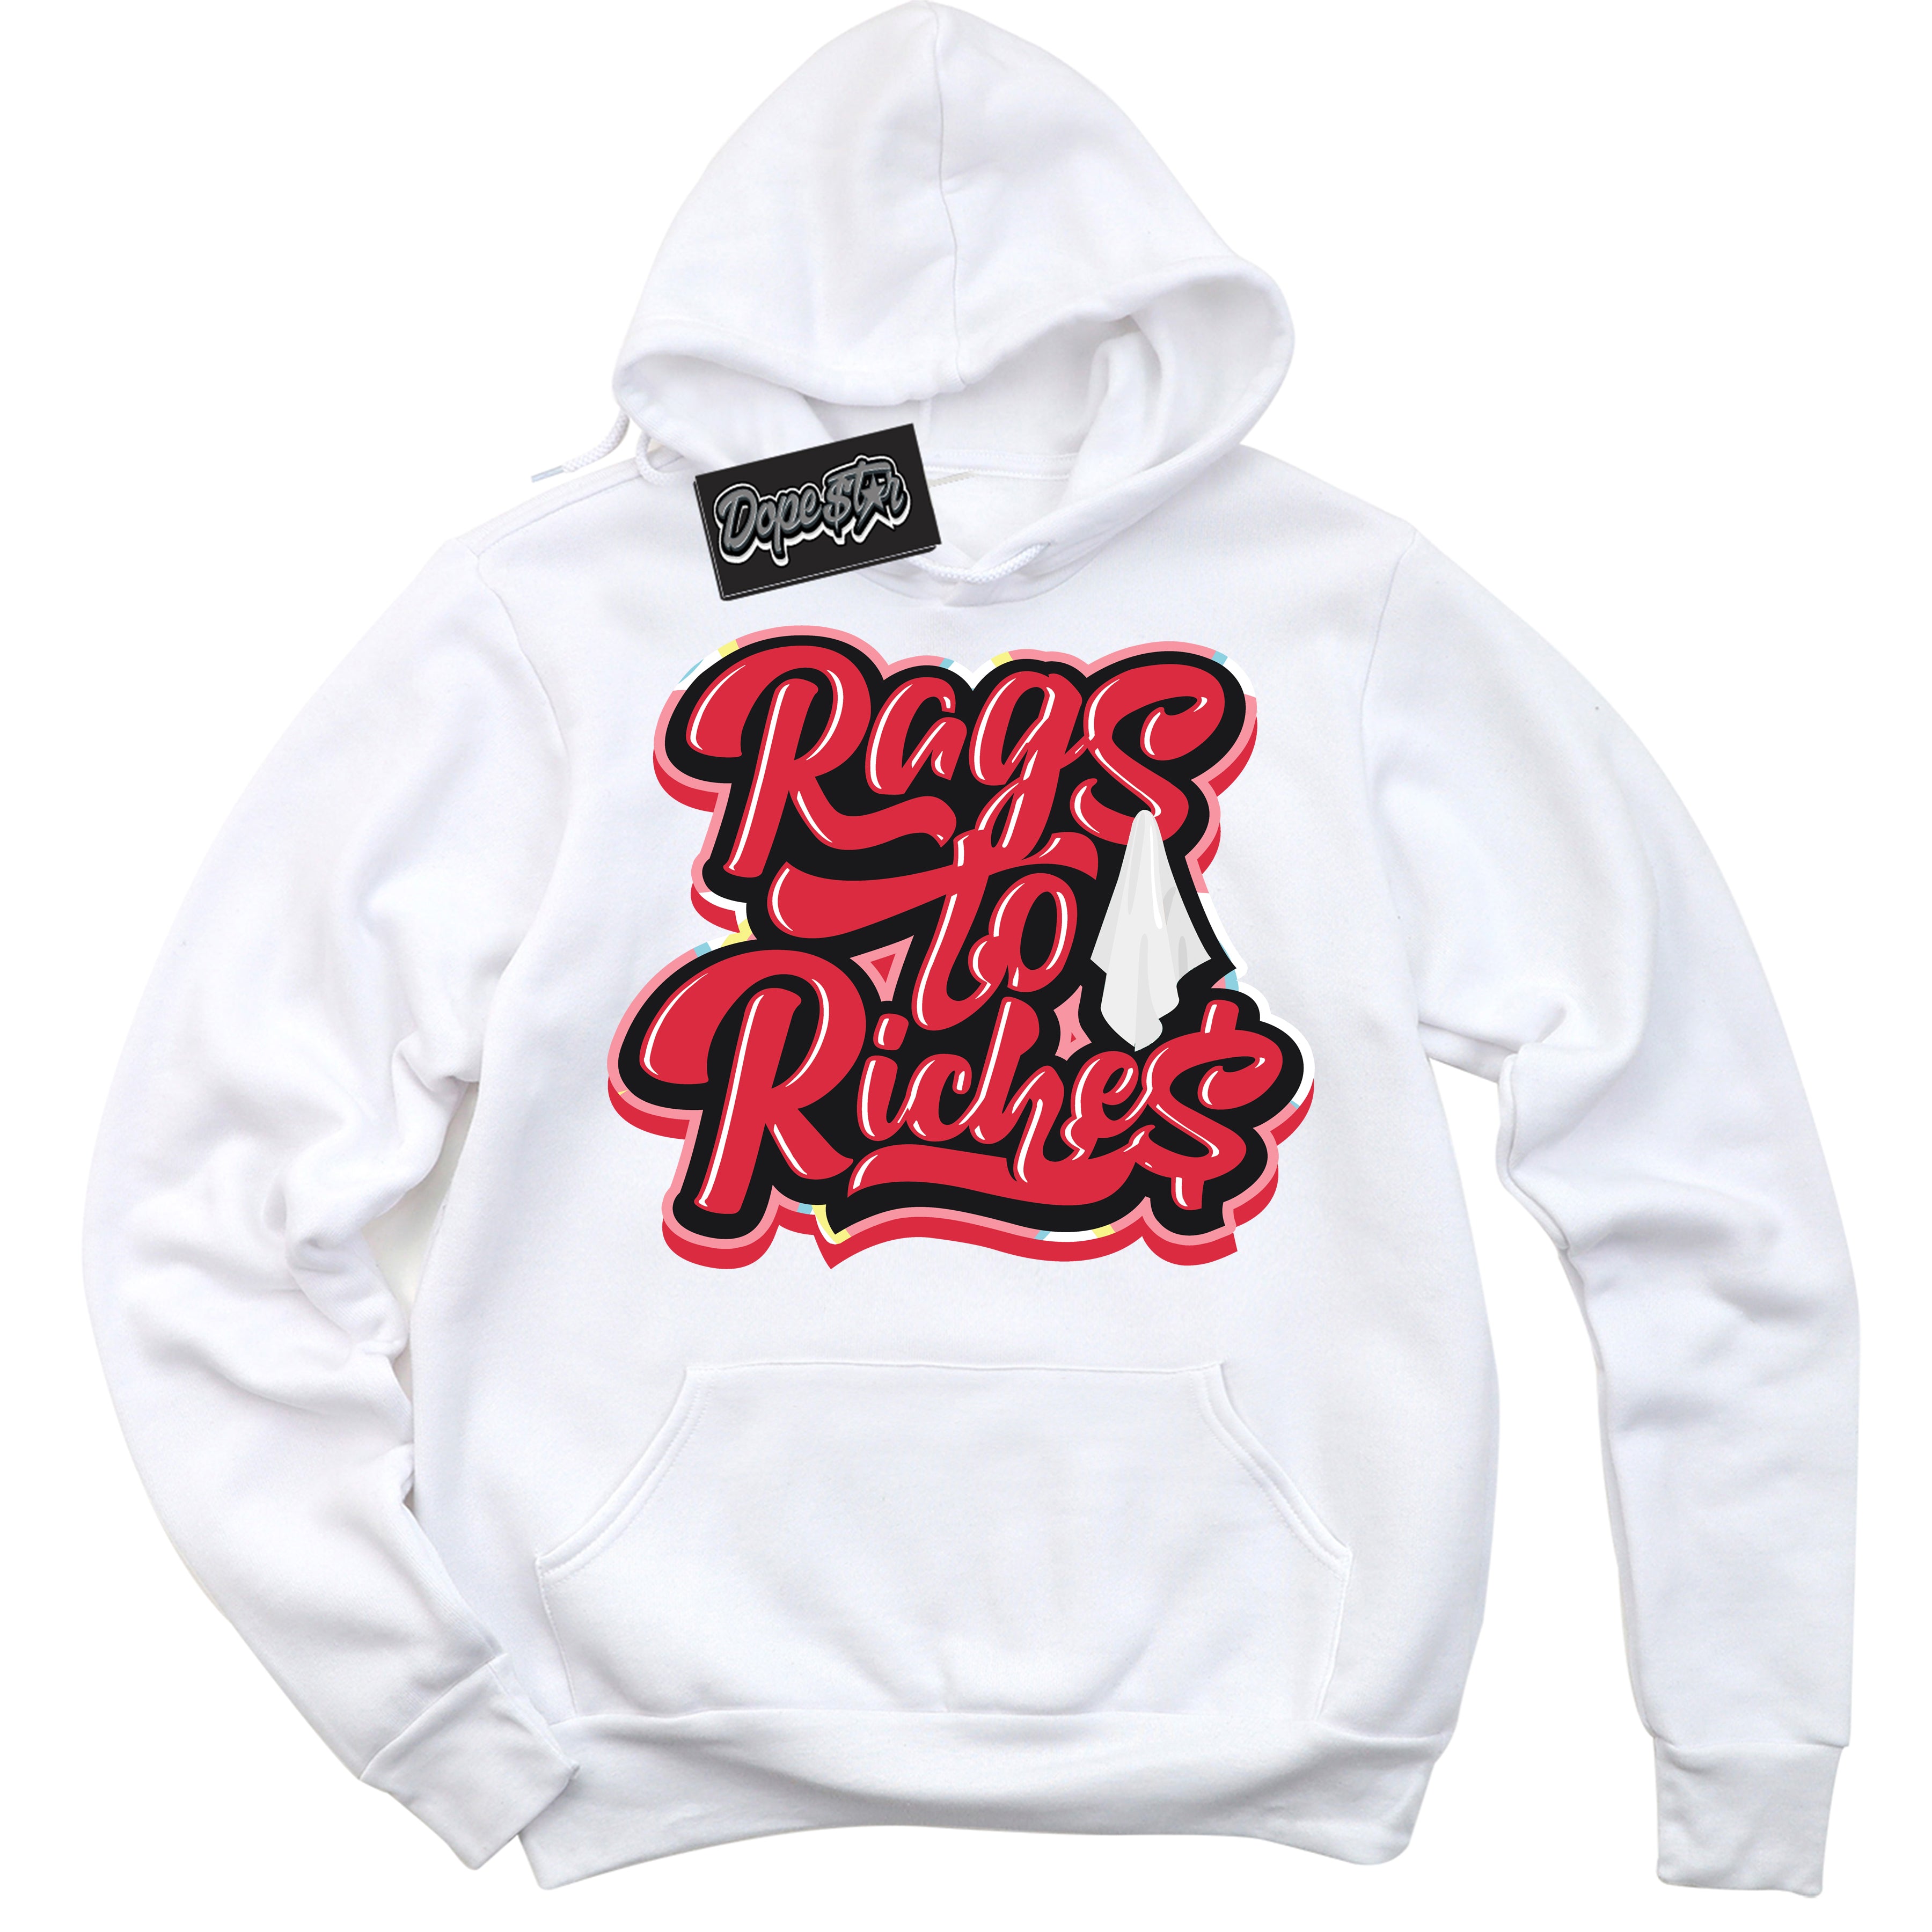 Cool White Graphic DopeStar Hoodie with “ Rags To Riches “ print, that perfectly matches Spider-Verse 1s sneakers